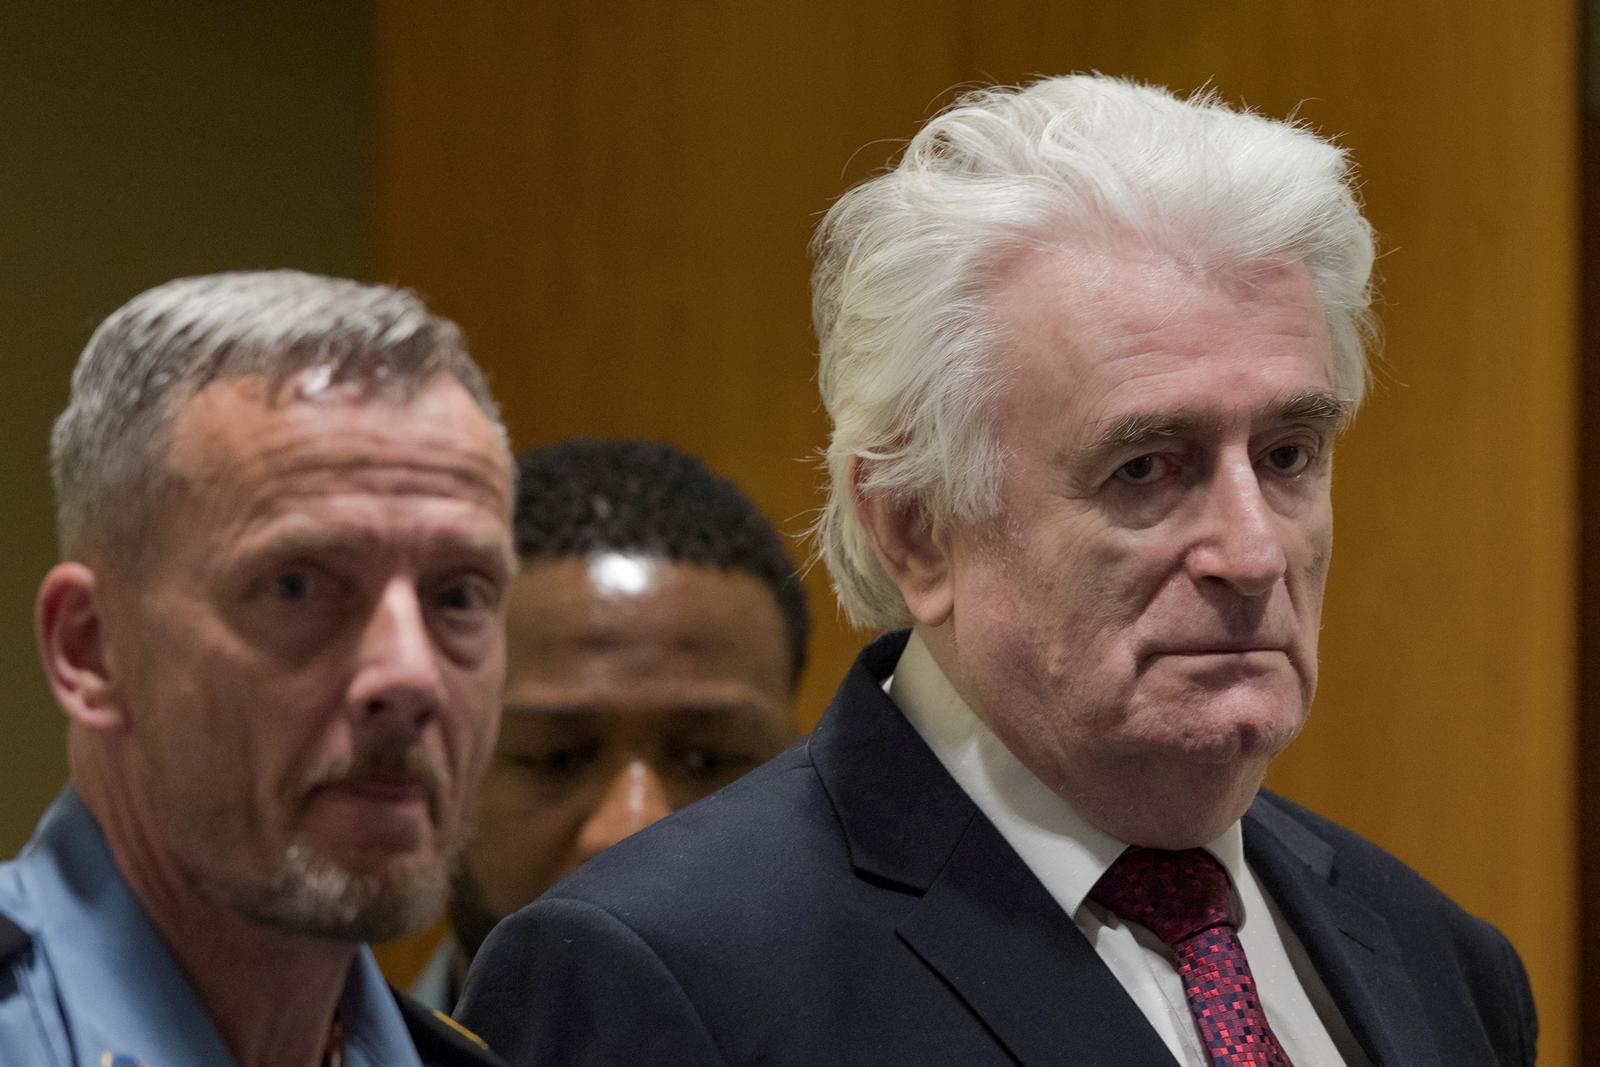 FILE PHOTO: Former Bosnian Serb leader Radovan Karadzic appears before the Appeals Chamber of the International Residual Mechanism for Criminal Tribunals ("Mechanism") ruling on a appeal of his 40 year sentence for war crimes in The Hague, Netherlands, March 20, 2019. Peter Dejong/Pool via REUTERS/File Photo Photo: POOL/REUTERS